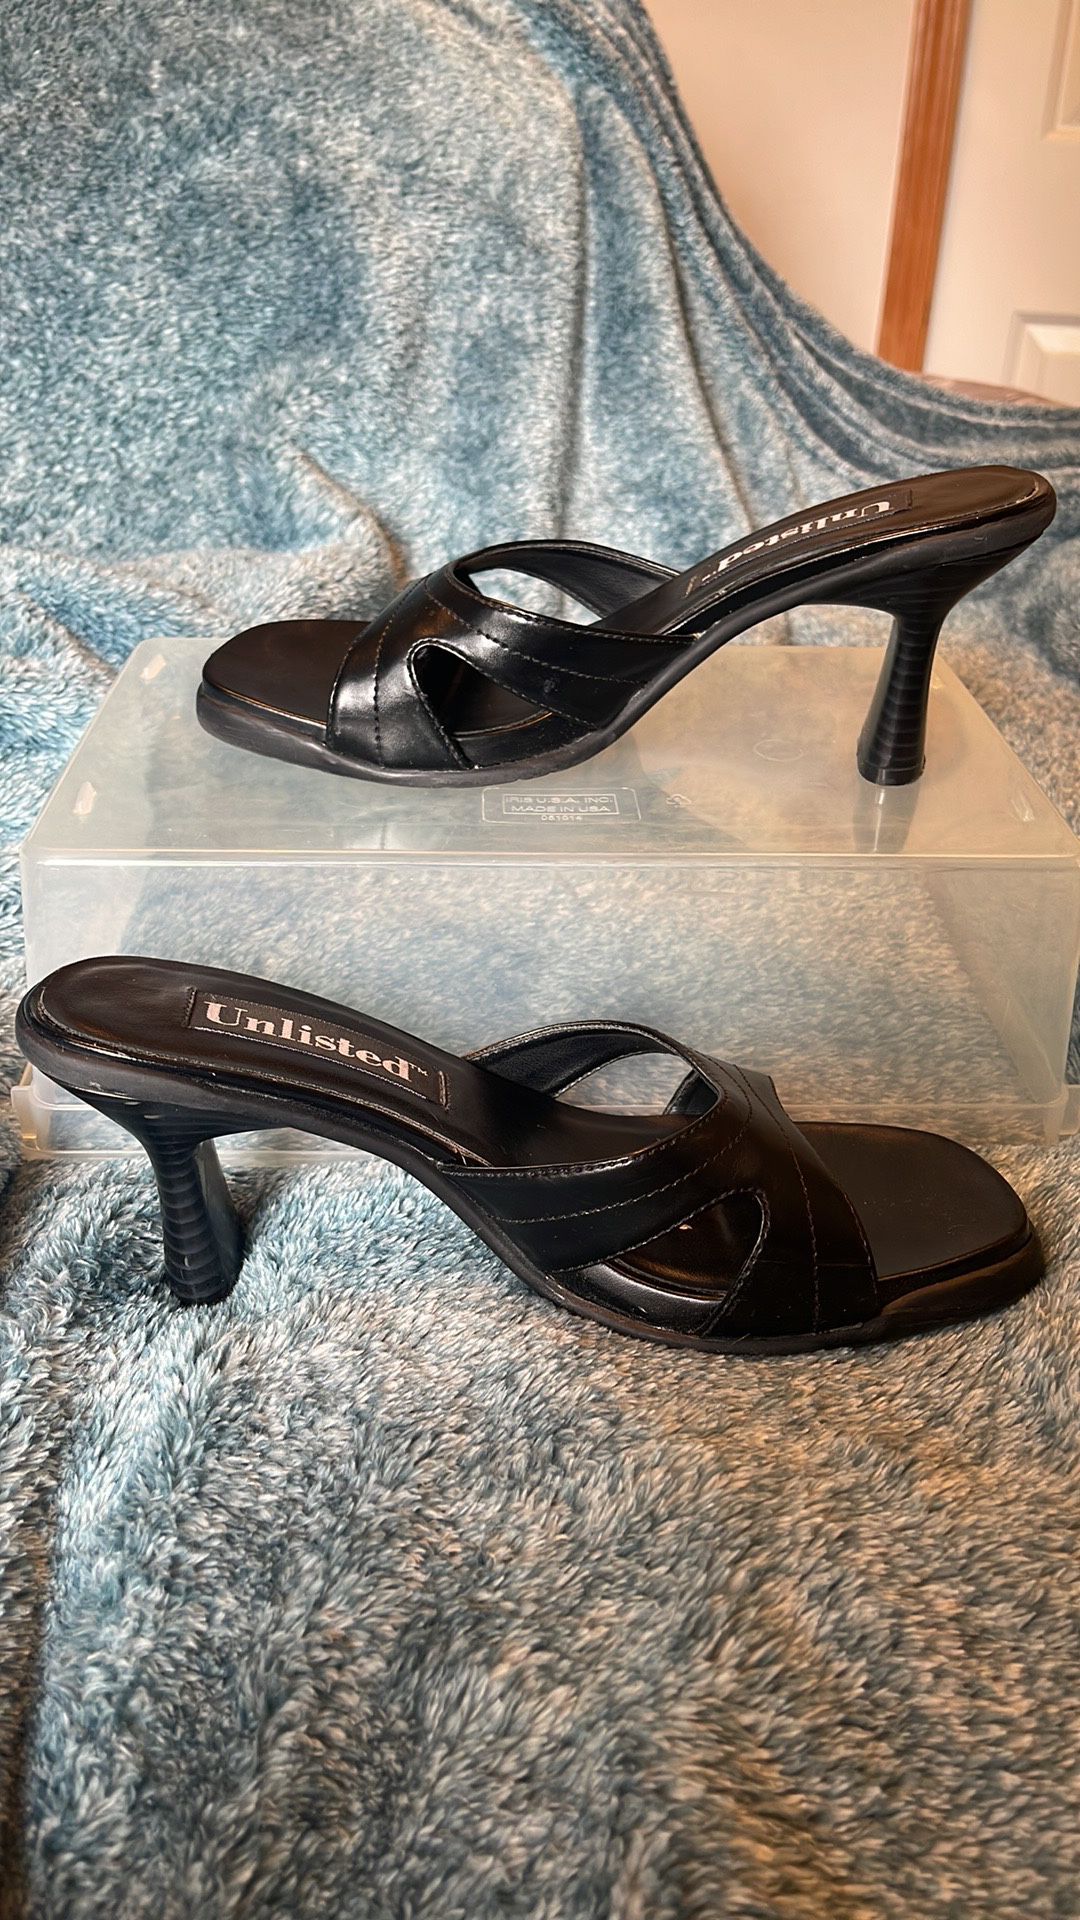 Black 3 Inch Heel Sandals, “Unlisted” By Kenneth Cole